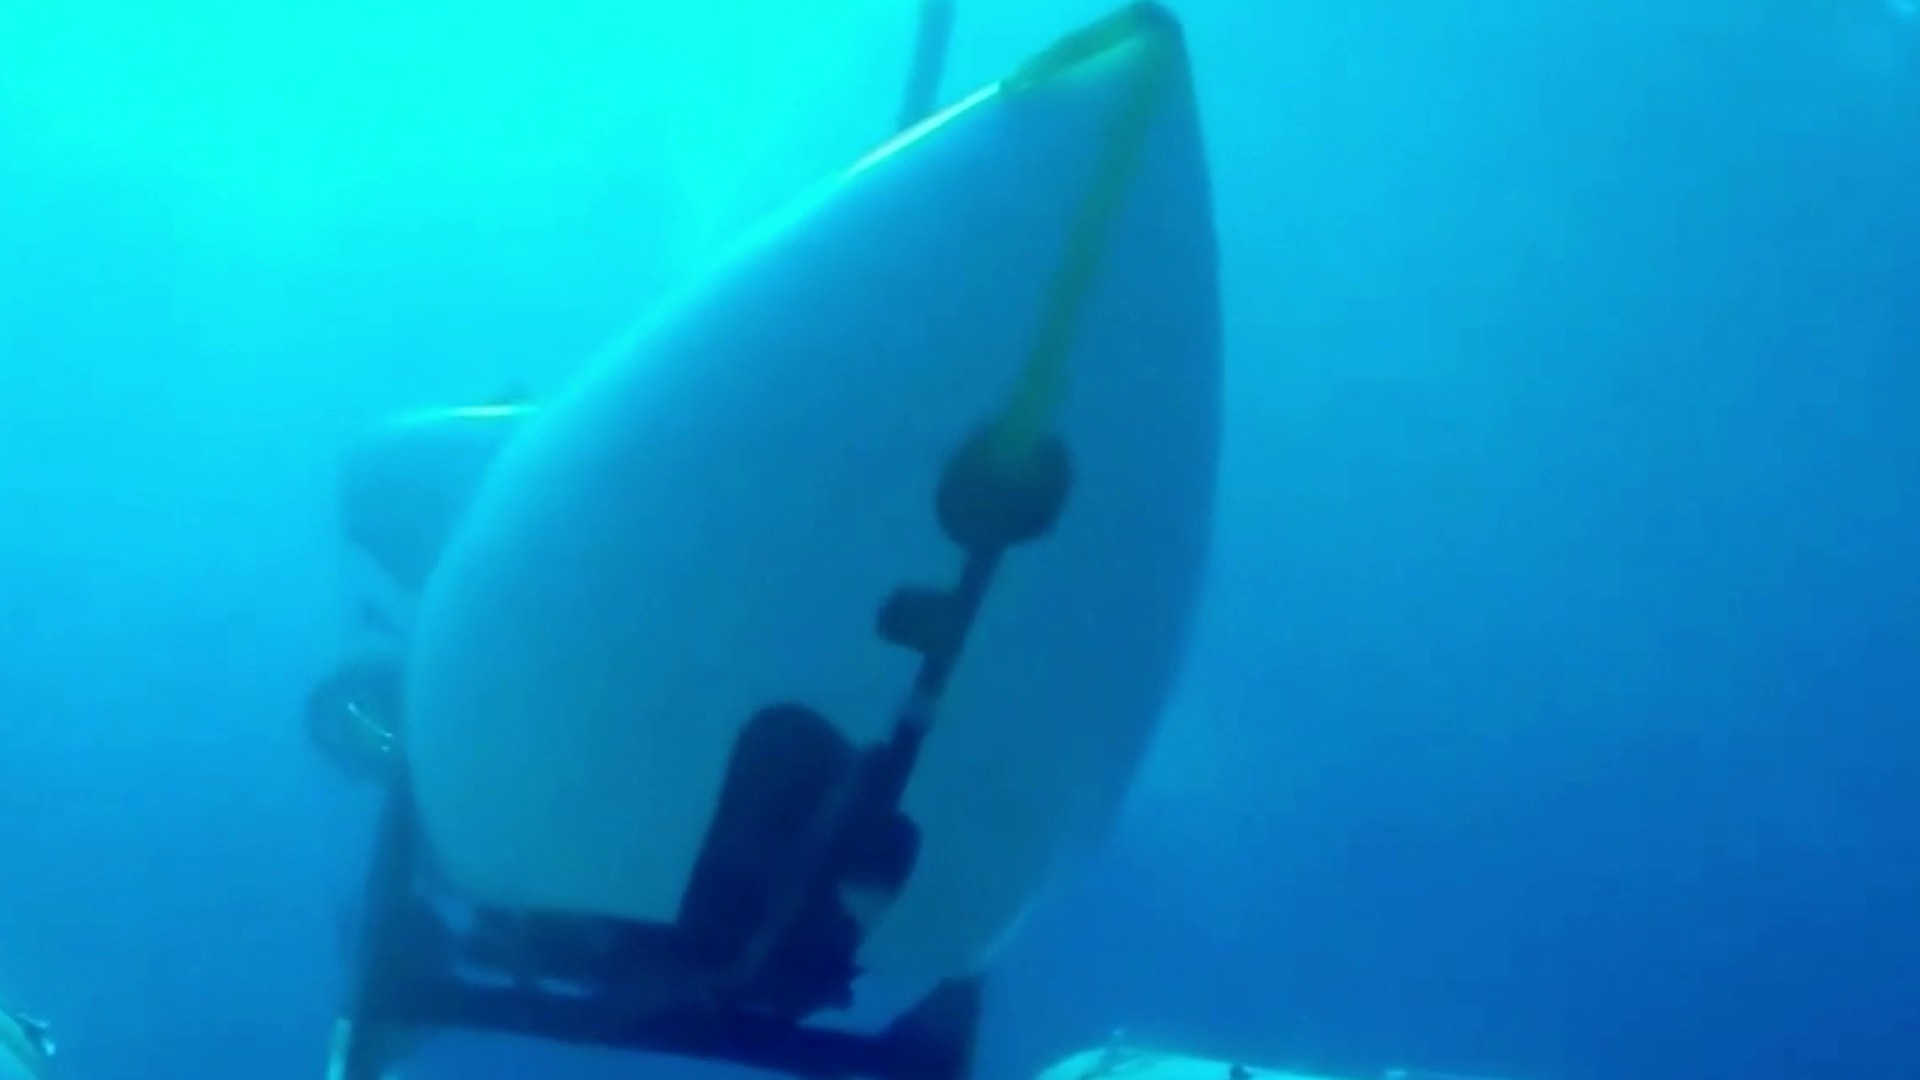 A Closer Look at the Submersible Lost in the North Atlantic - The